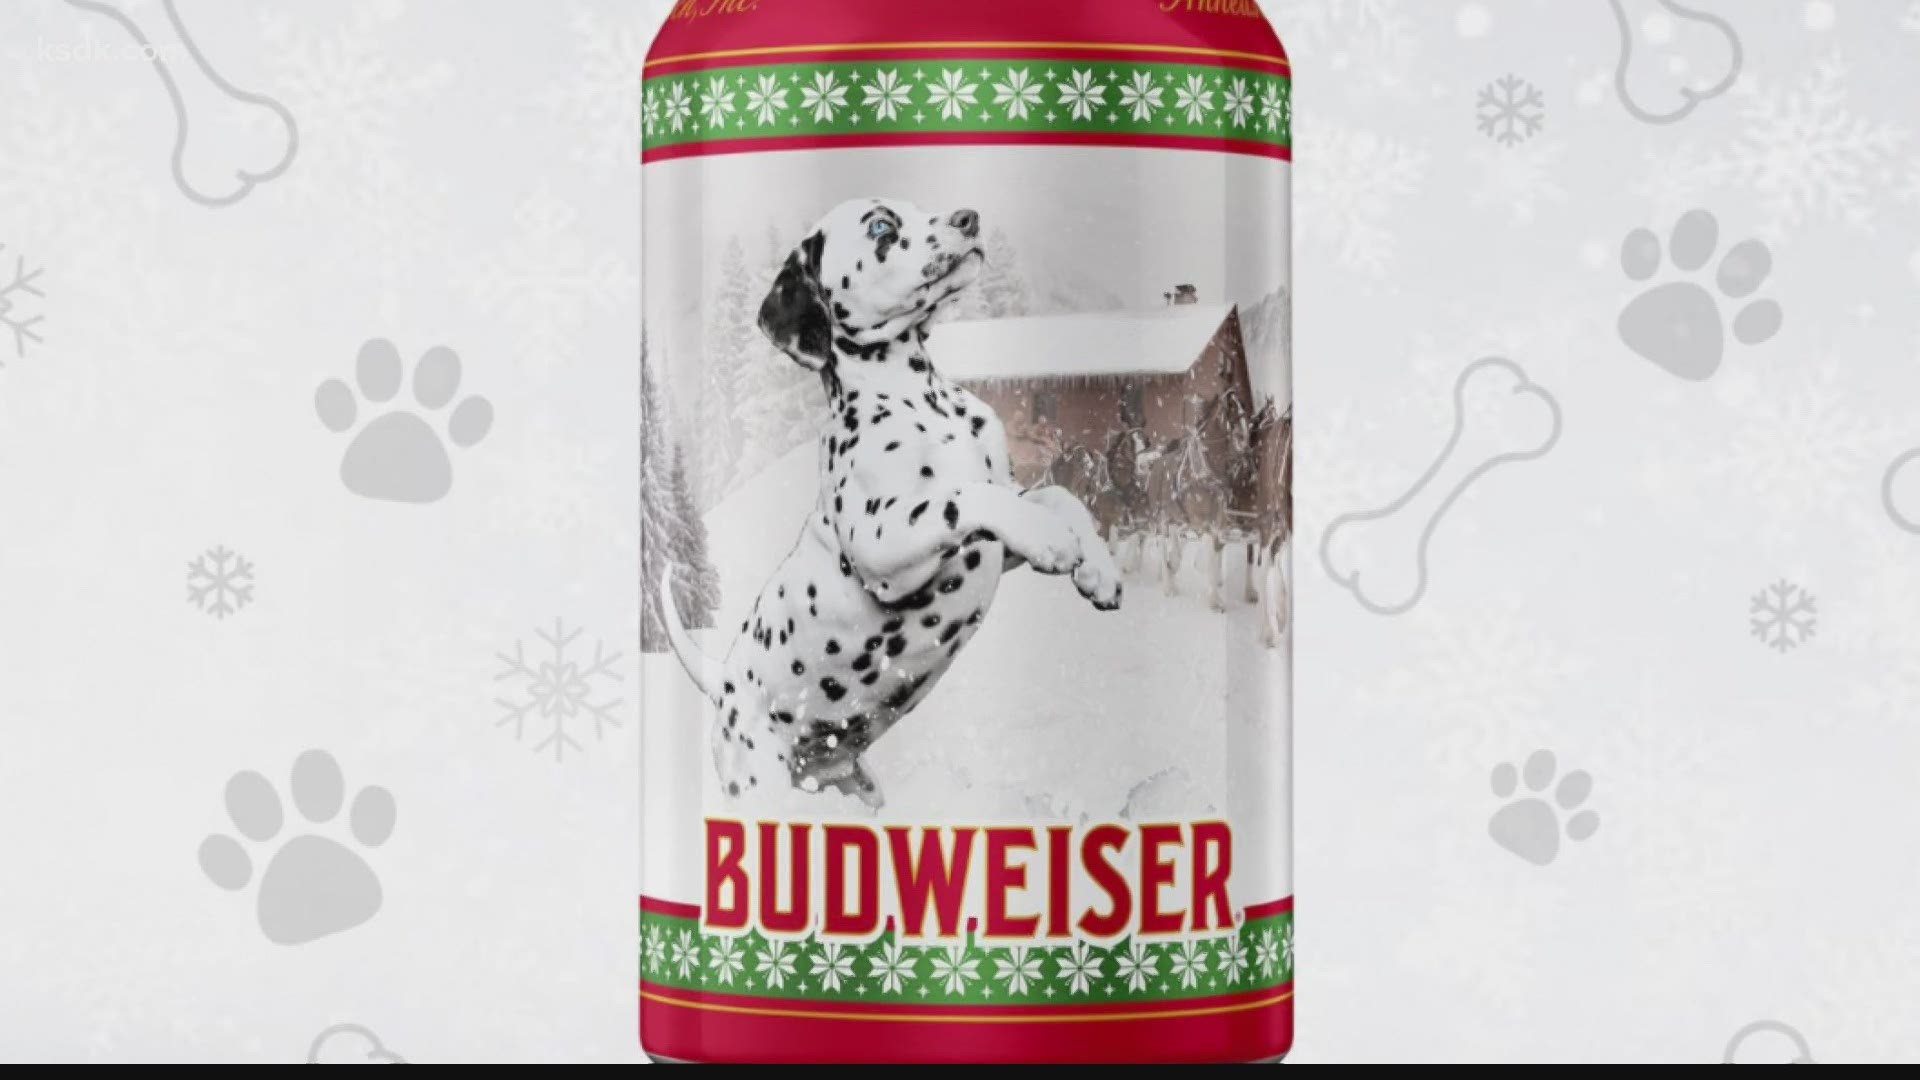 You can enjoy your two favorite things, your pup and a beer!